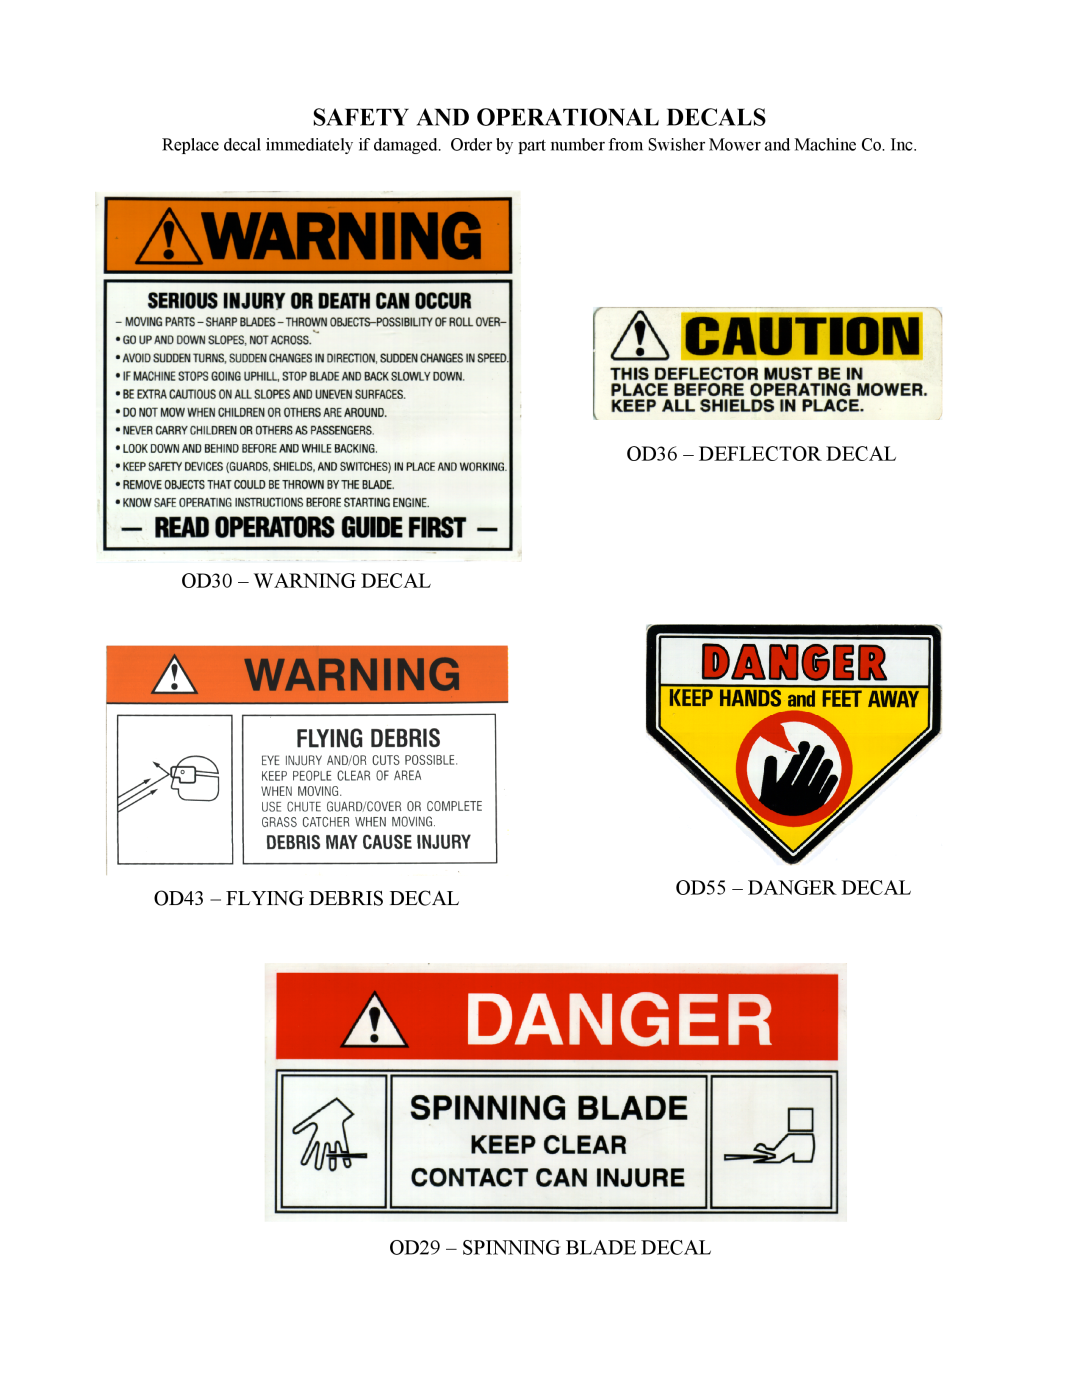 Swisher WB800-42F Safety And Operational Decals, OD36 - DEFLECTOR DECAL OD30 - WARNING DECAL, OD43 - FLYING DEBRIS DECAL 